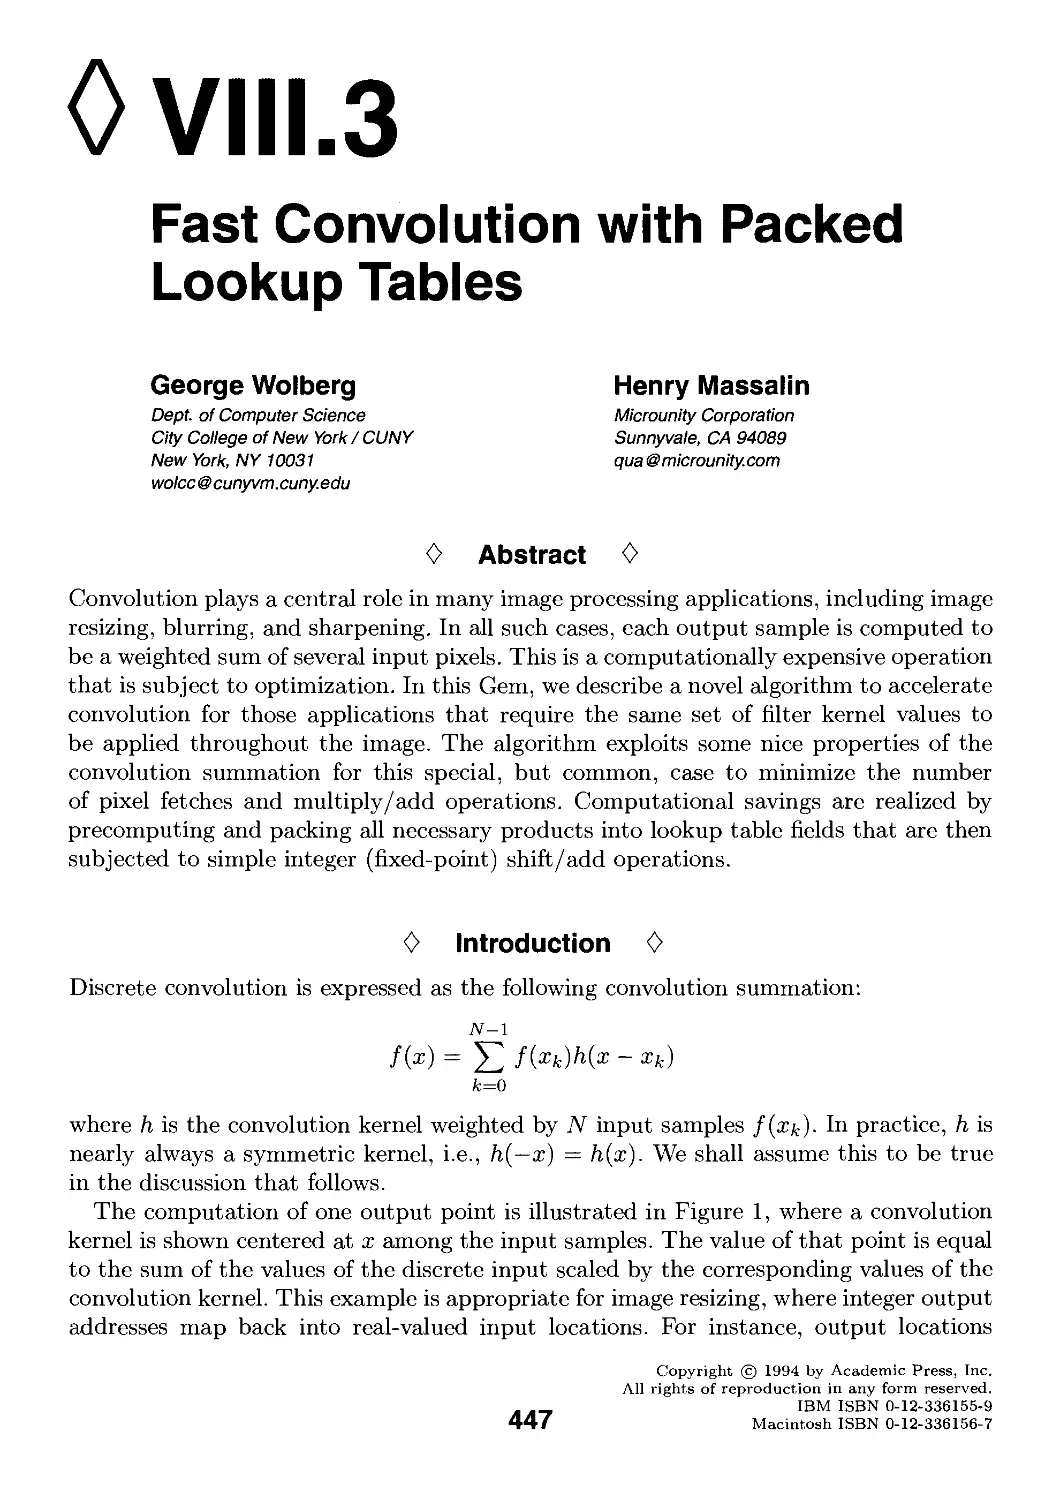 VIII.3. Fast Convolution with Packed Lookup Tables by George Wolberg and Henry Massalin